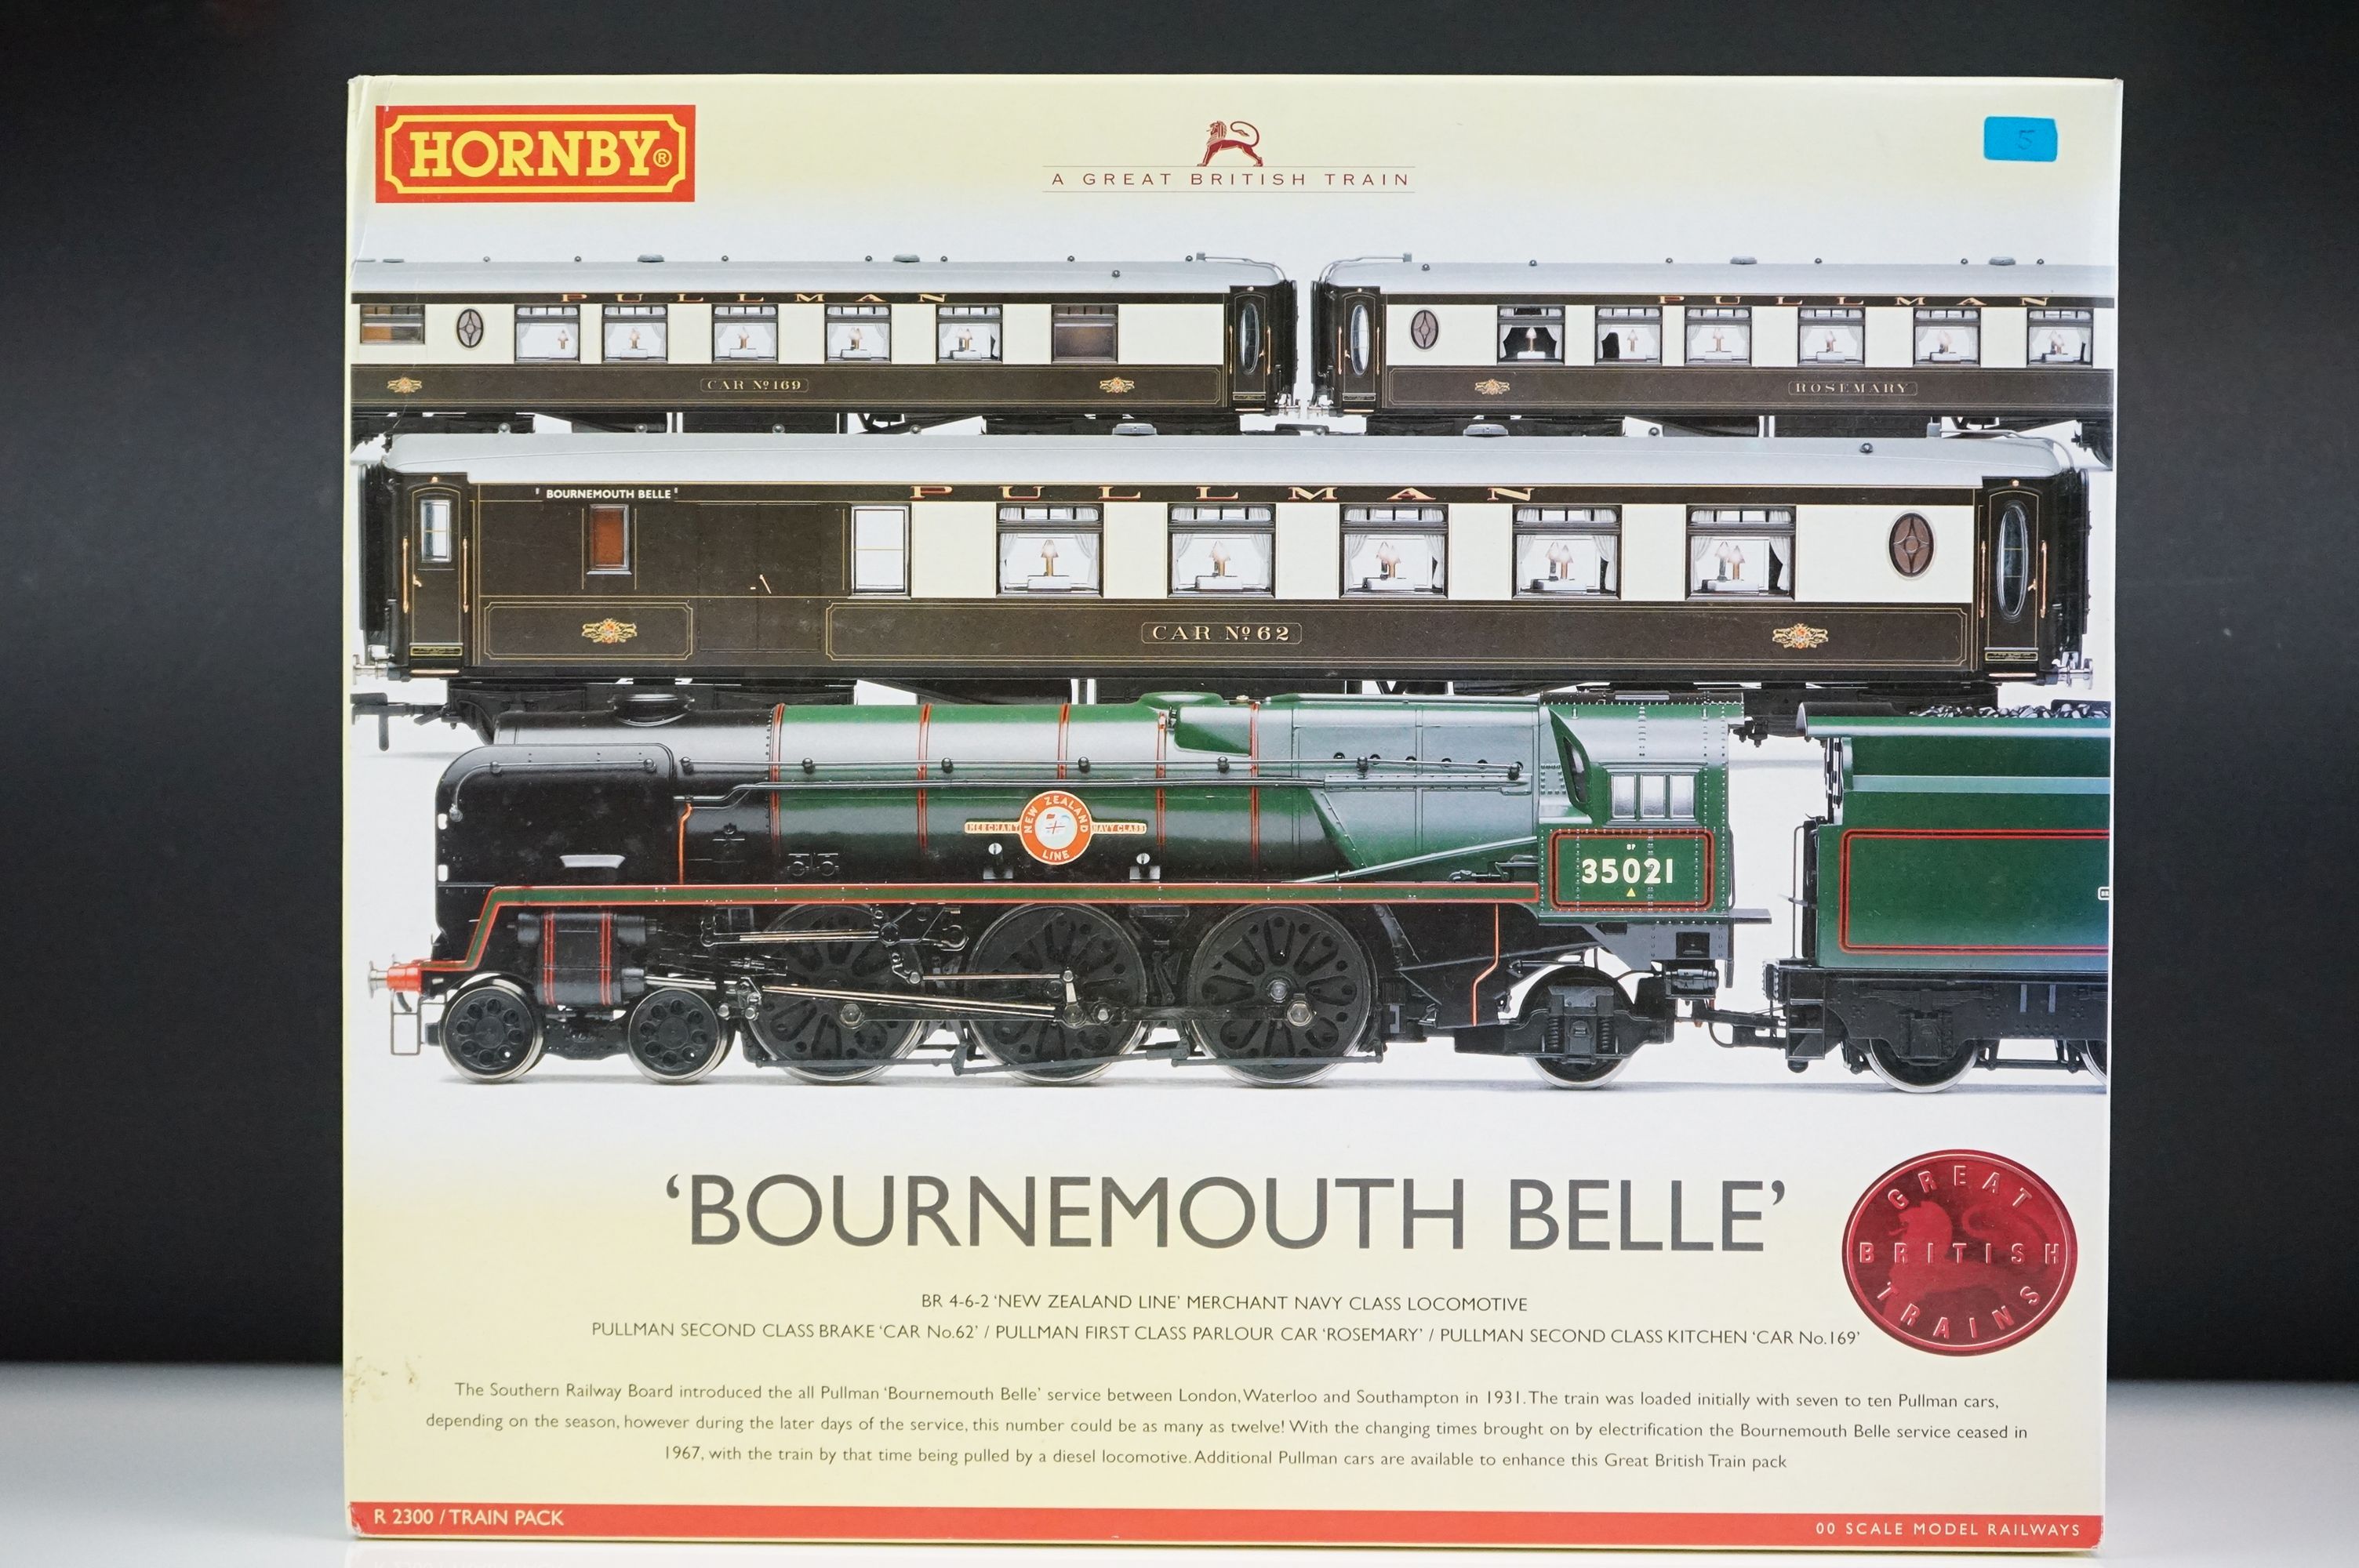 Boxed Hornby OO gauge R2300 Bournemouth Belle Train Pack complete with Merchant Class locomotive,